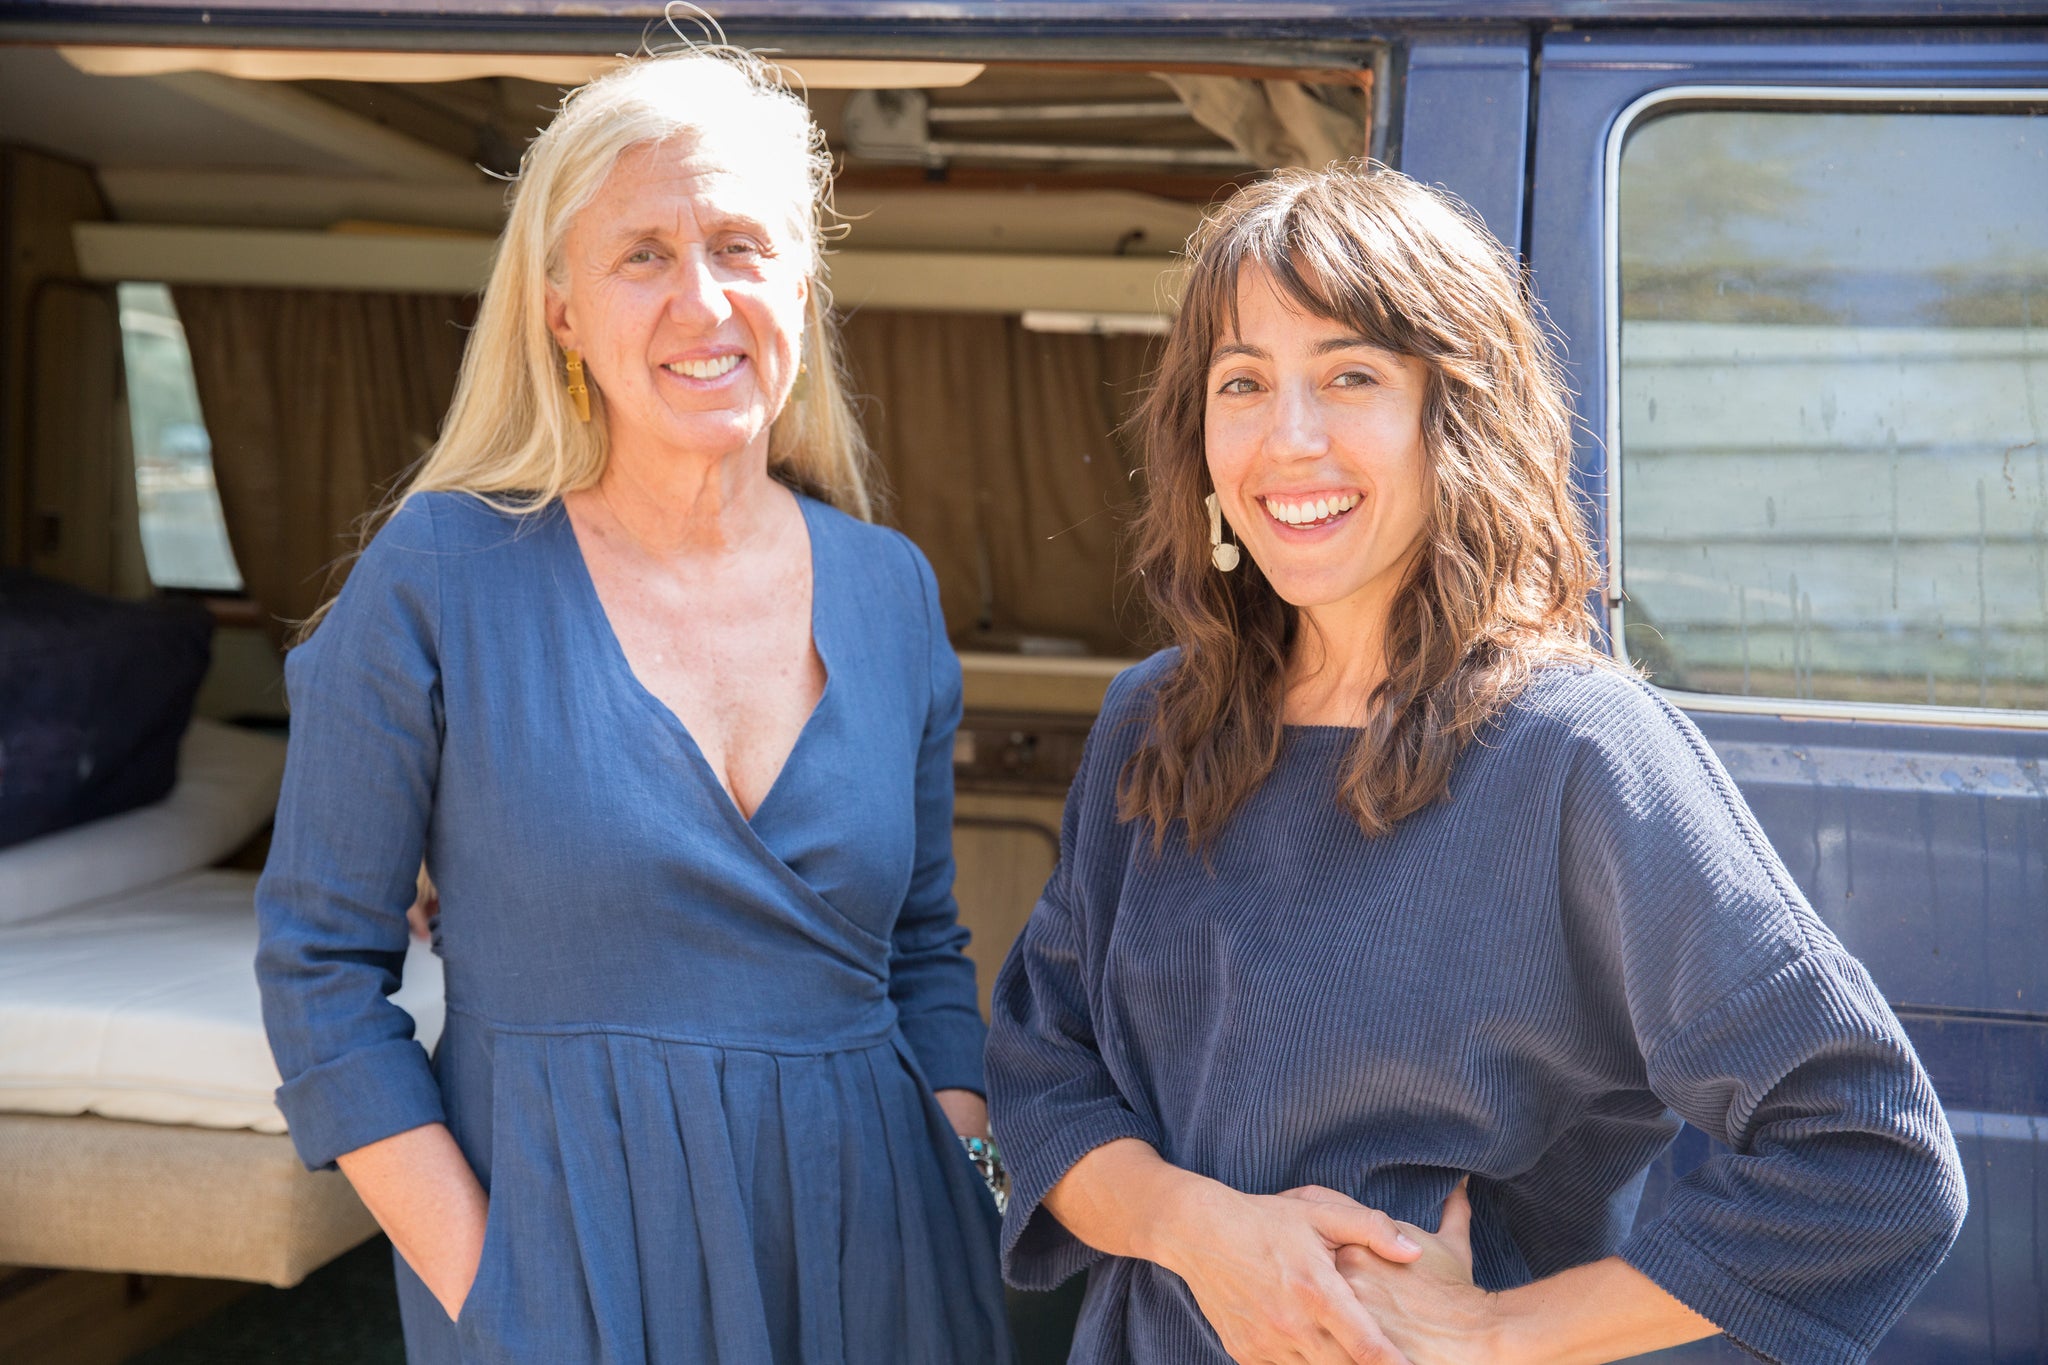 Dotter owners, Susanne McLean and Annika Huston, in front of blue van